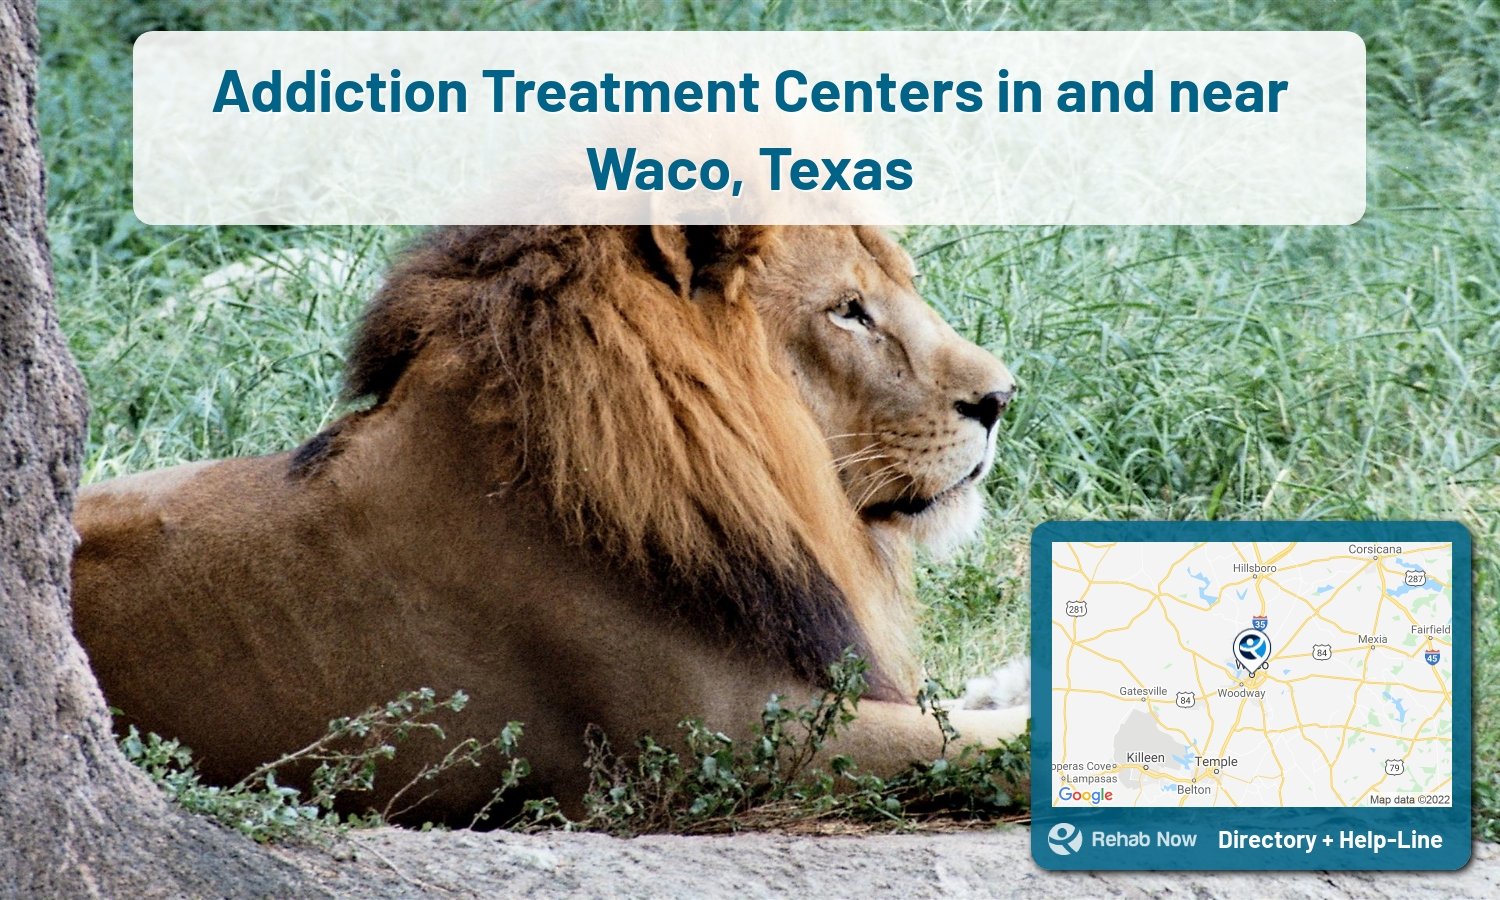 View options, availability, treatment methods, and more, for drug rehab and alcohol treatment in Waco, Texas